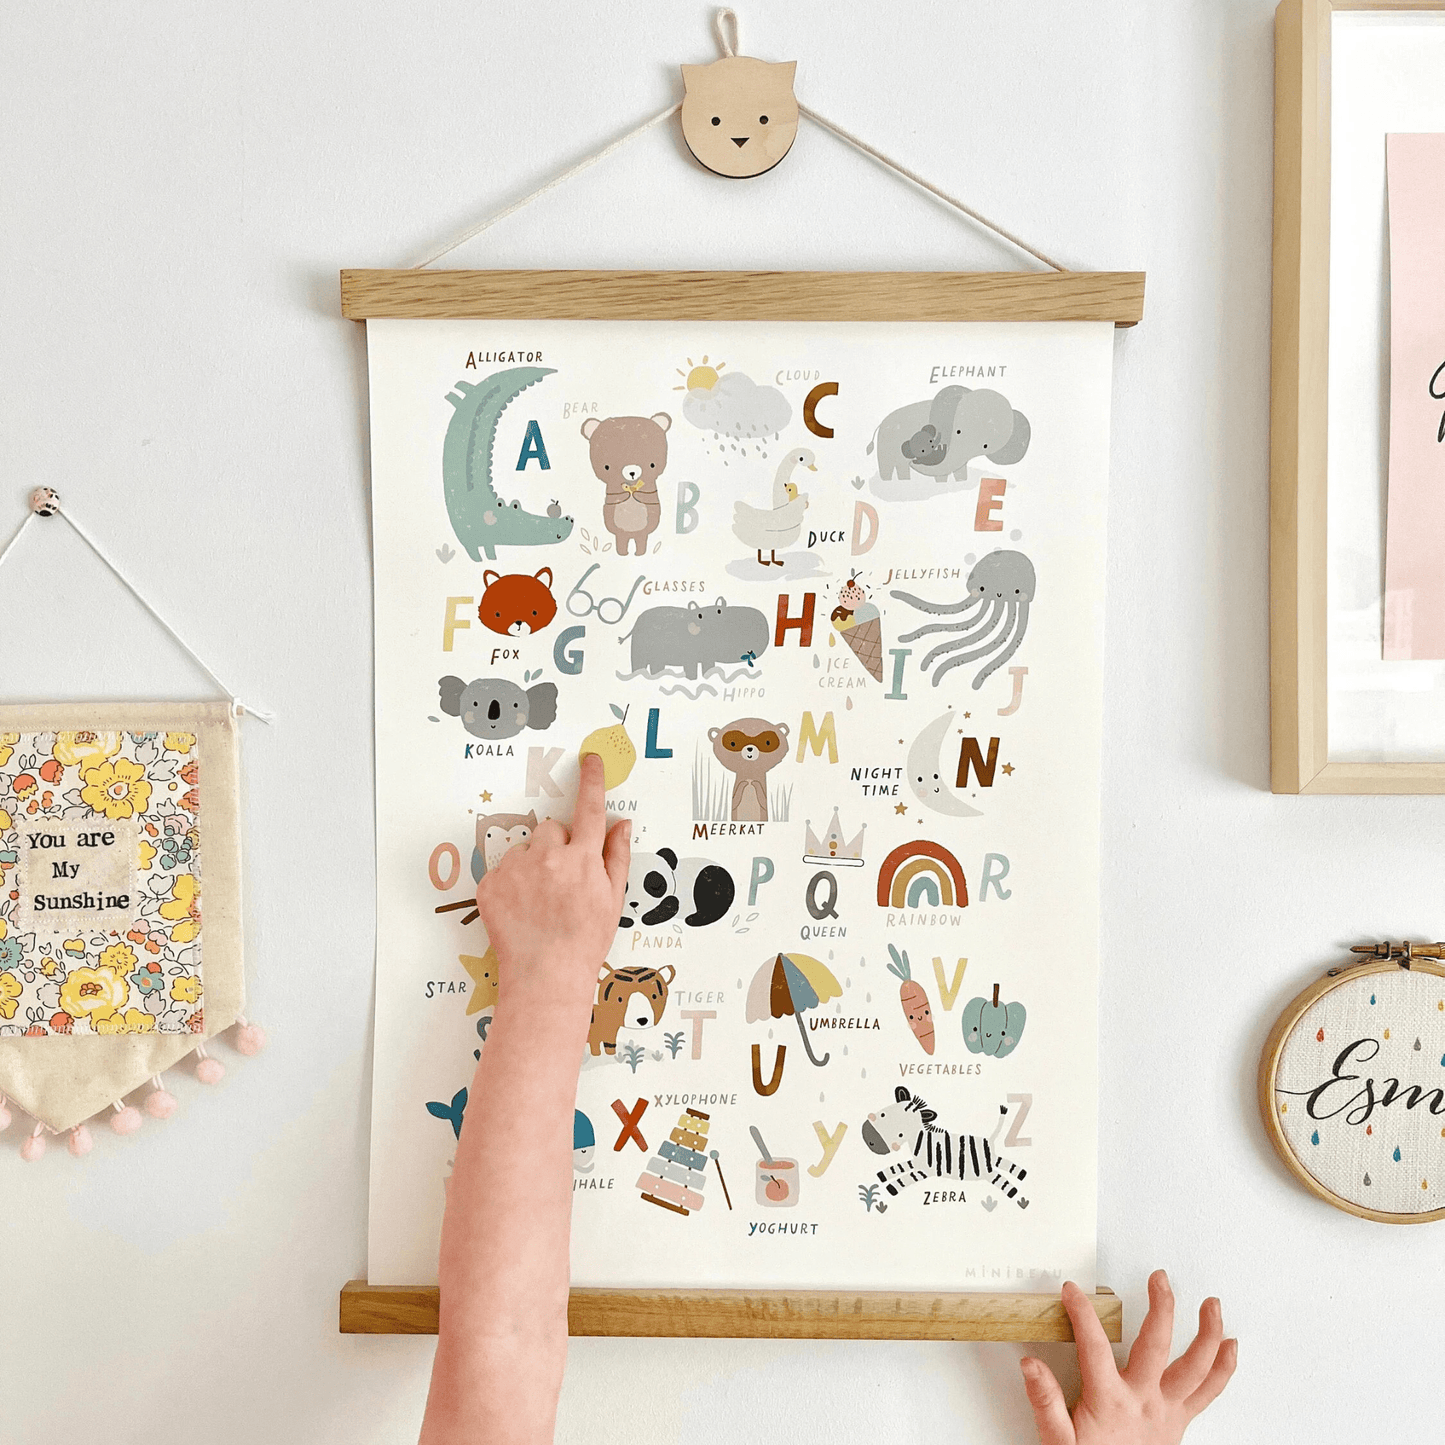 Image of a child pointing at a Lemon on our cute animals art print. Art print is hung in an oak hanger from a cat shaped wooden hook. With a 'you are my sunshine' pennant hanging next to it. Our Cute animals Alphabet Art print features a variety cute animals and everyday items in soft tones, representing every letter of the alphabet. The print includes everything from a rainbow and elephant to a star and panda, all set against a clean white background.